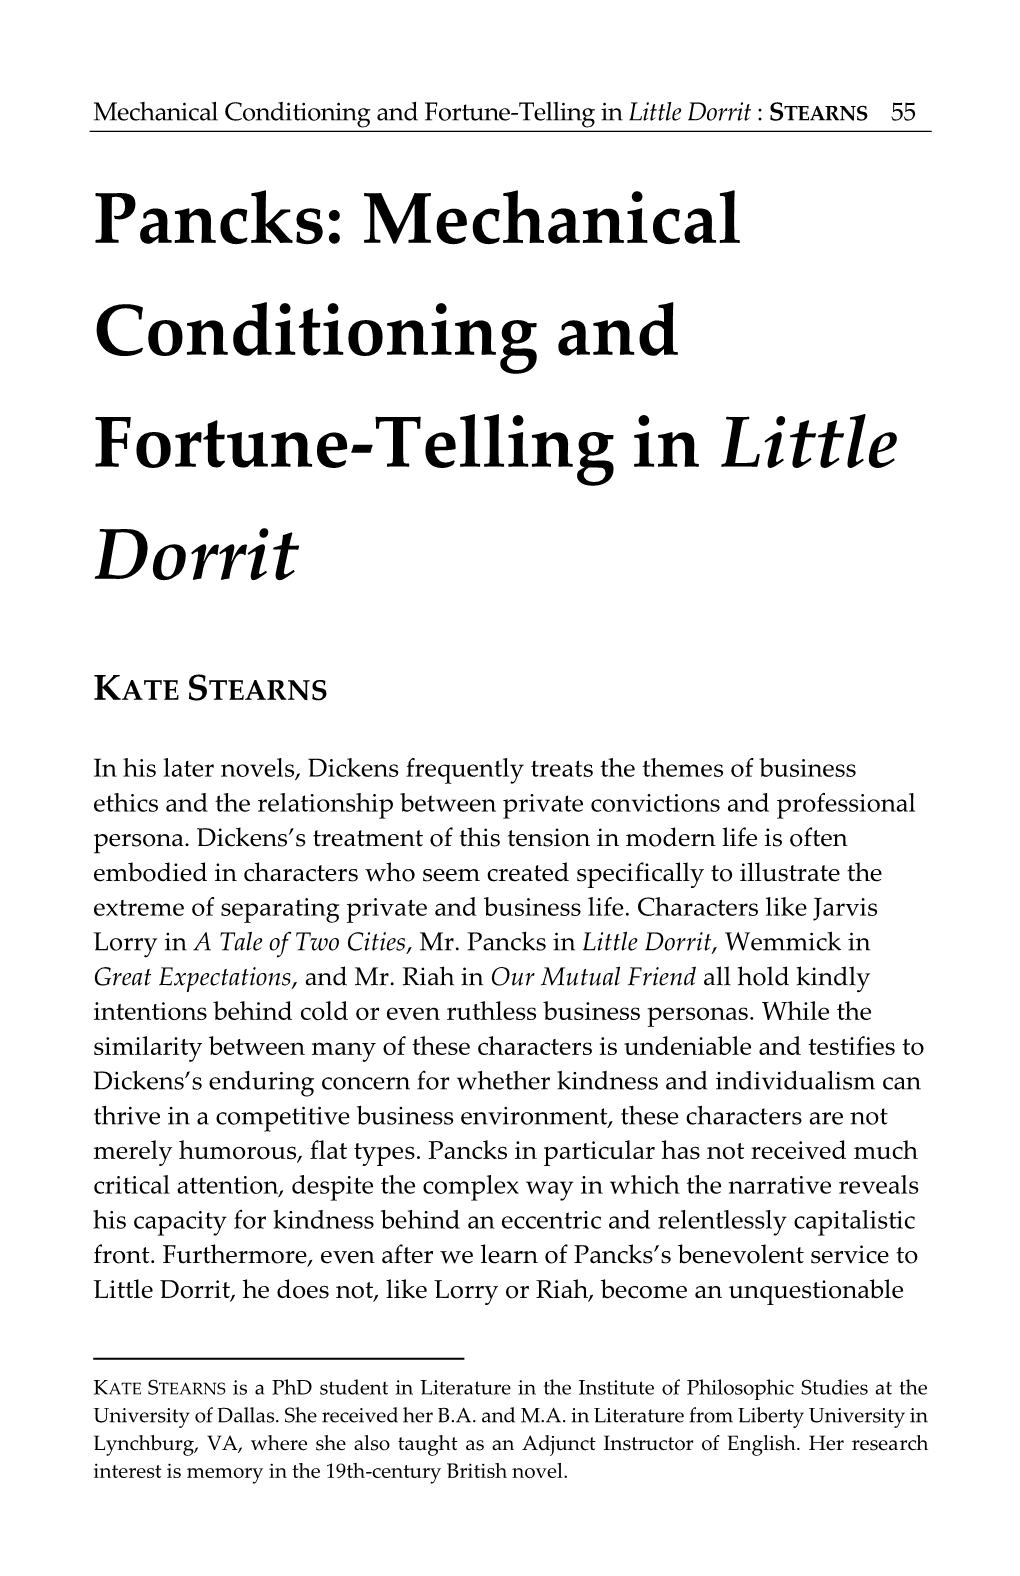 Pancks: Mechanical Conditioning and Fortune-Telling in Little Dorrit